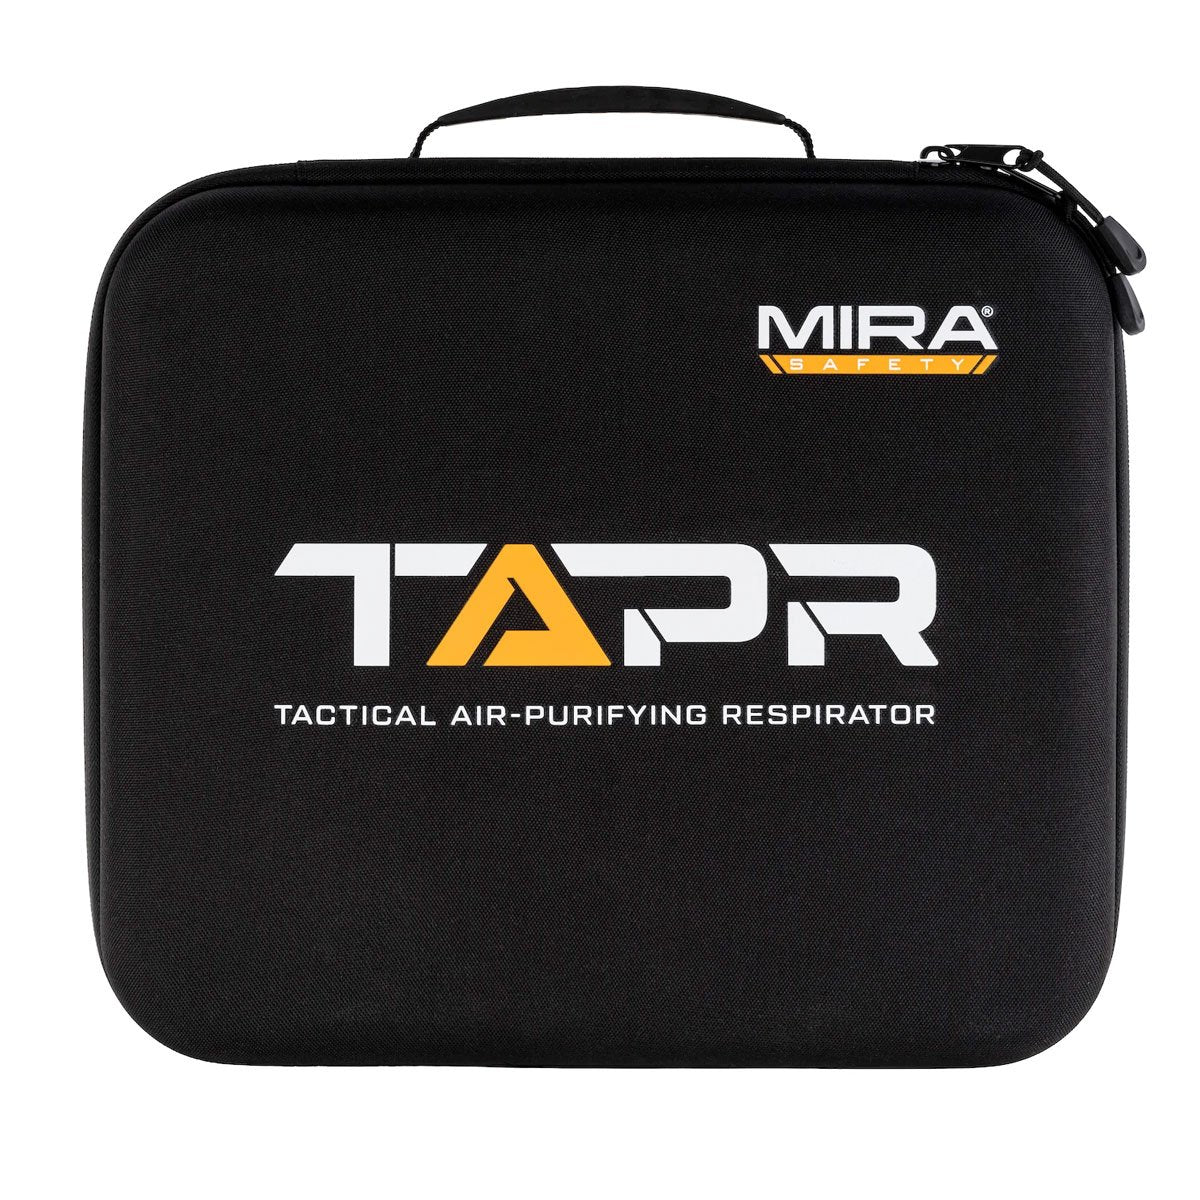 Mira Safety TAPR Tactical Air-Purifying Respirator Mask Universal Fit Protective Gear MIRA Safety Tactical Gear Supplier Tactical Distributors Australia